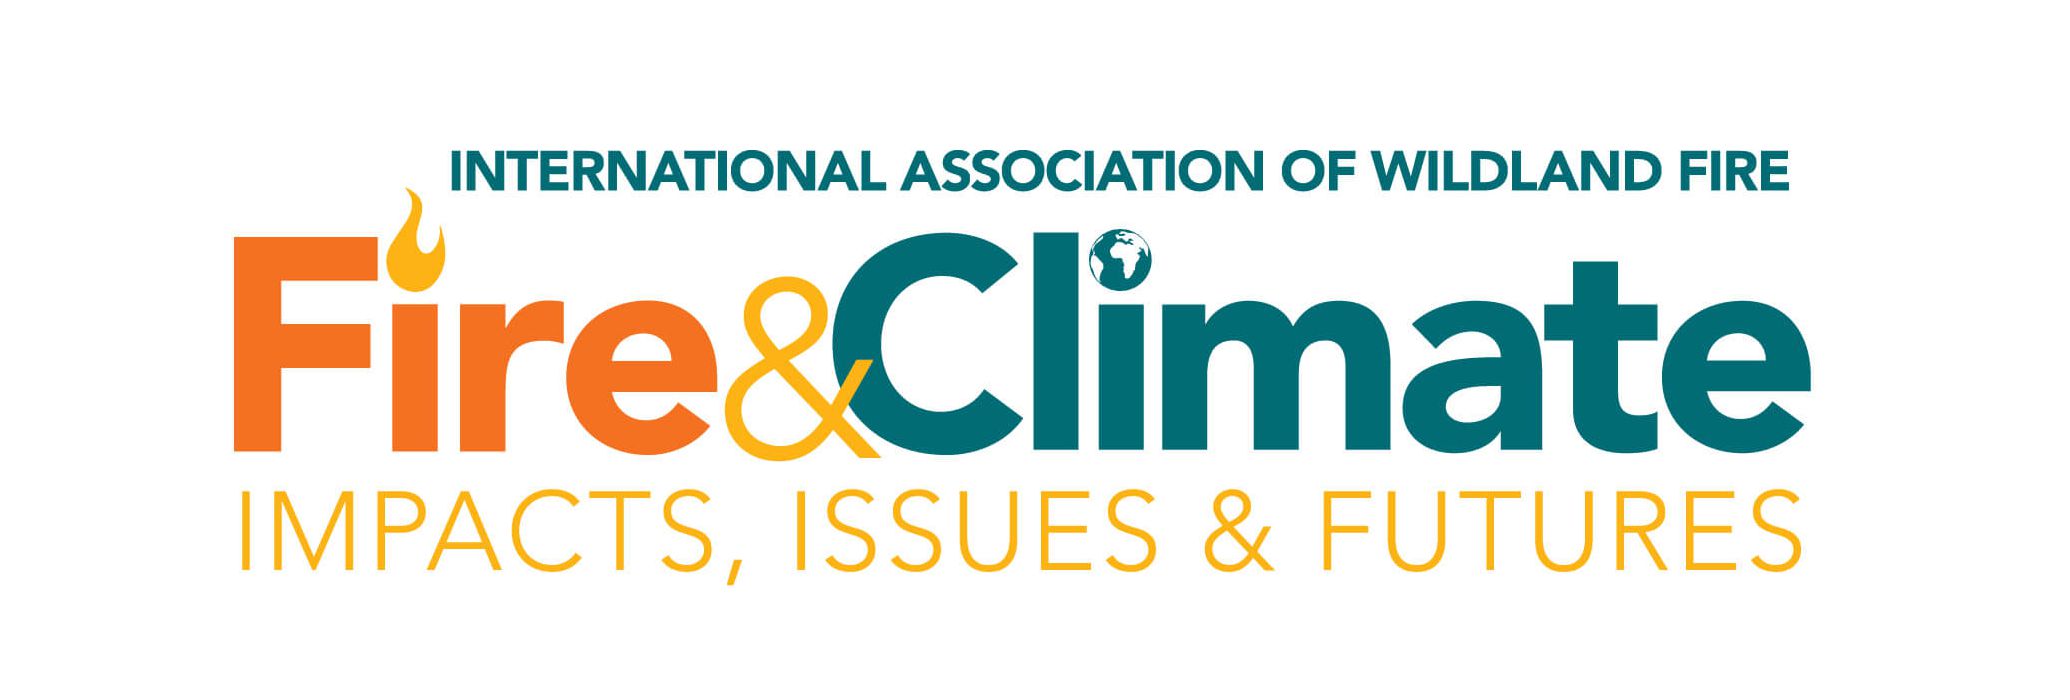 Fire and Climate Logo no dates